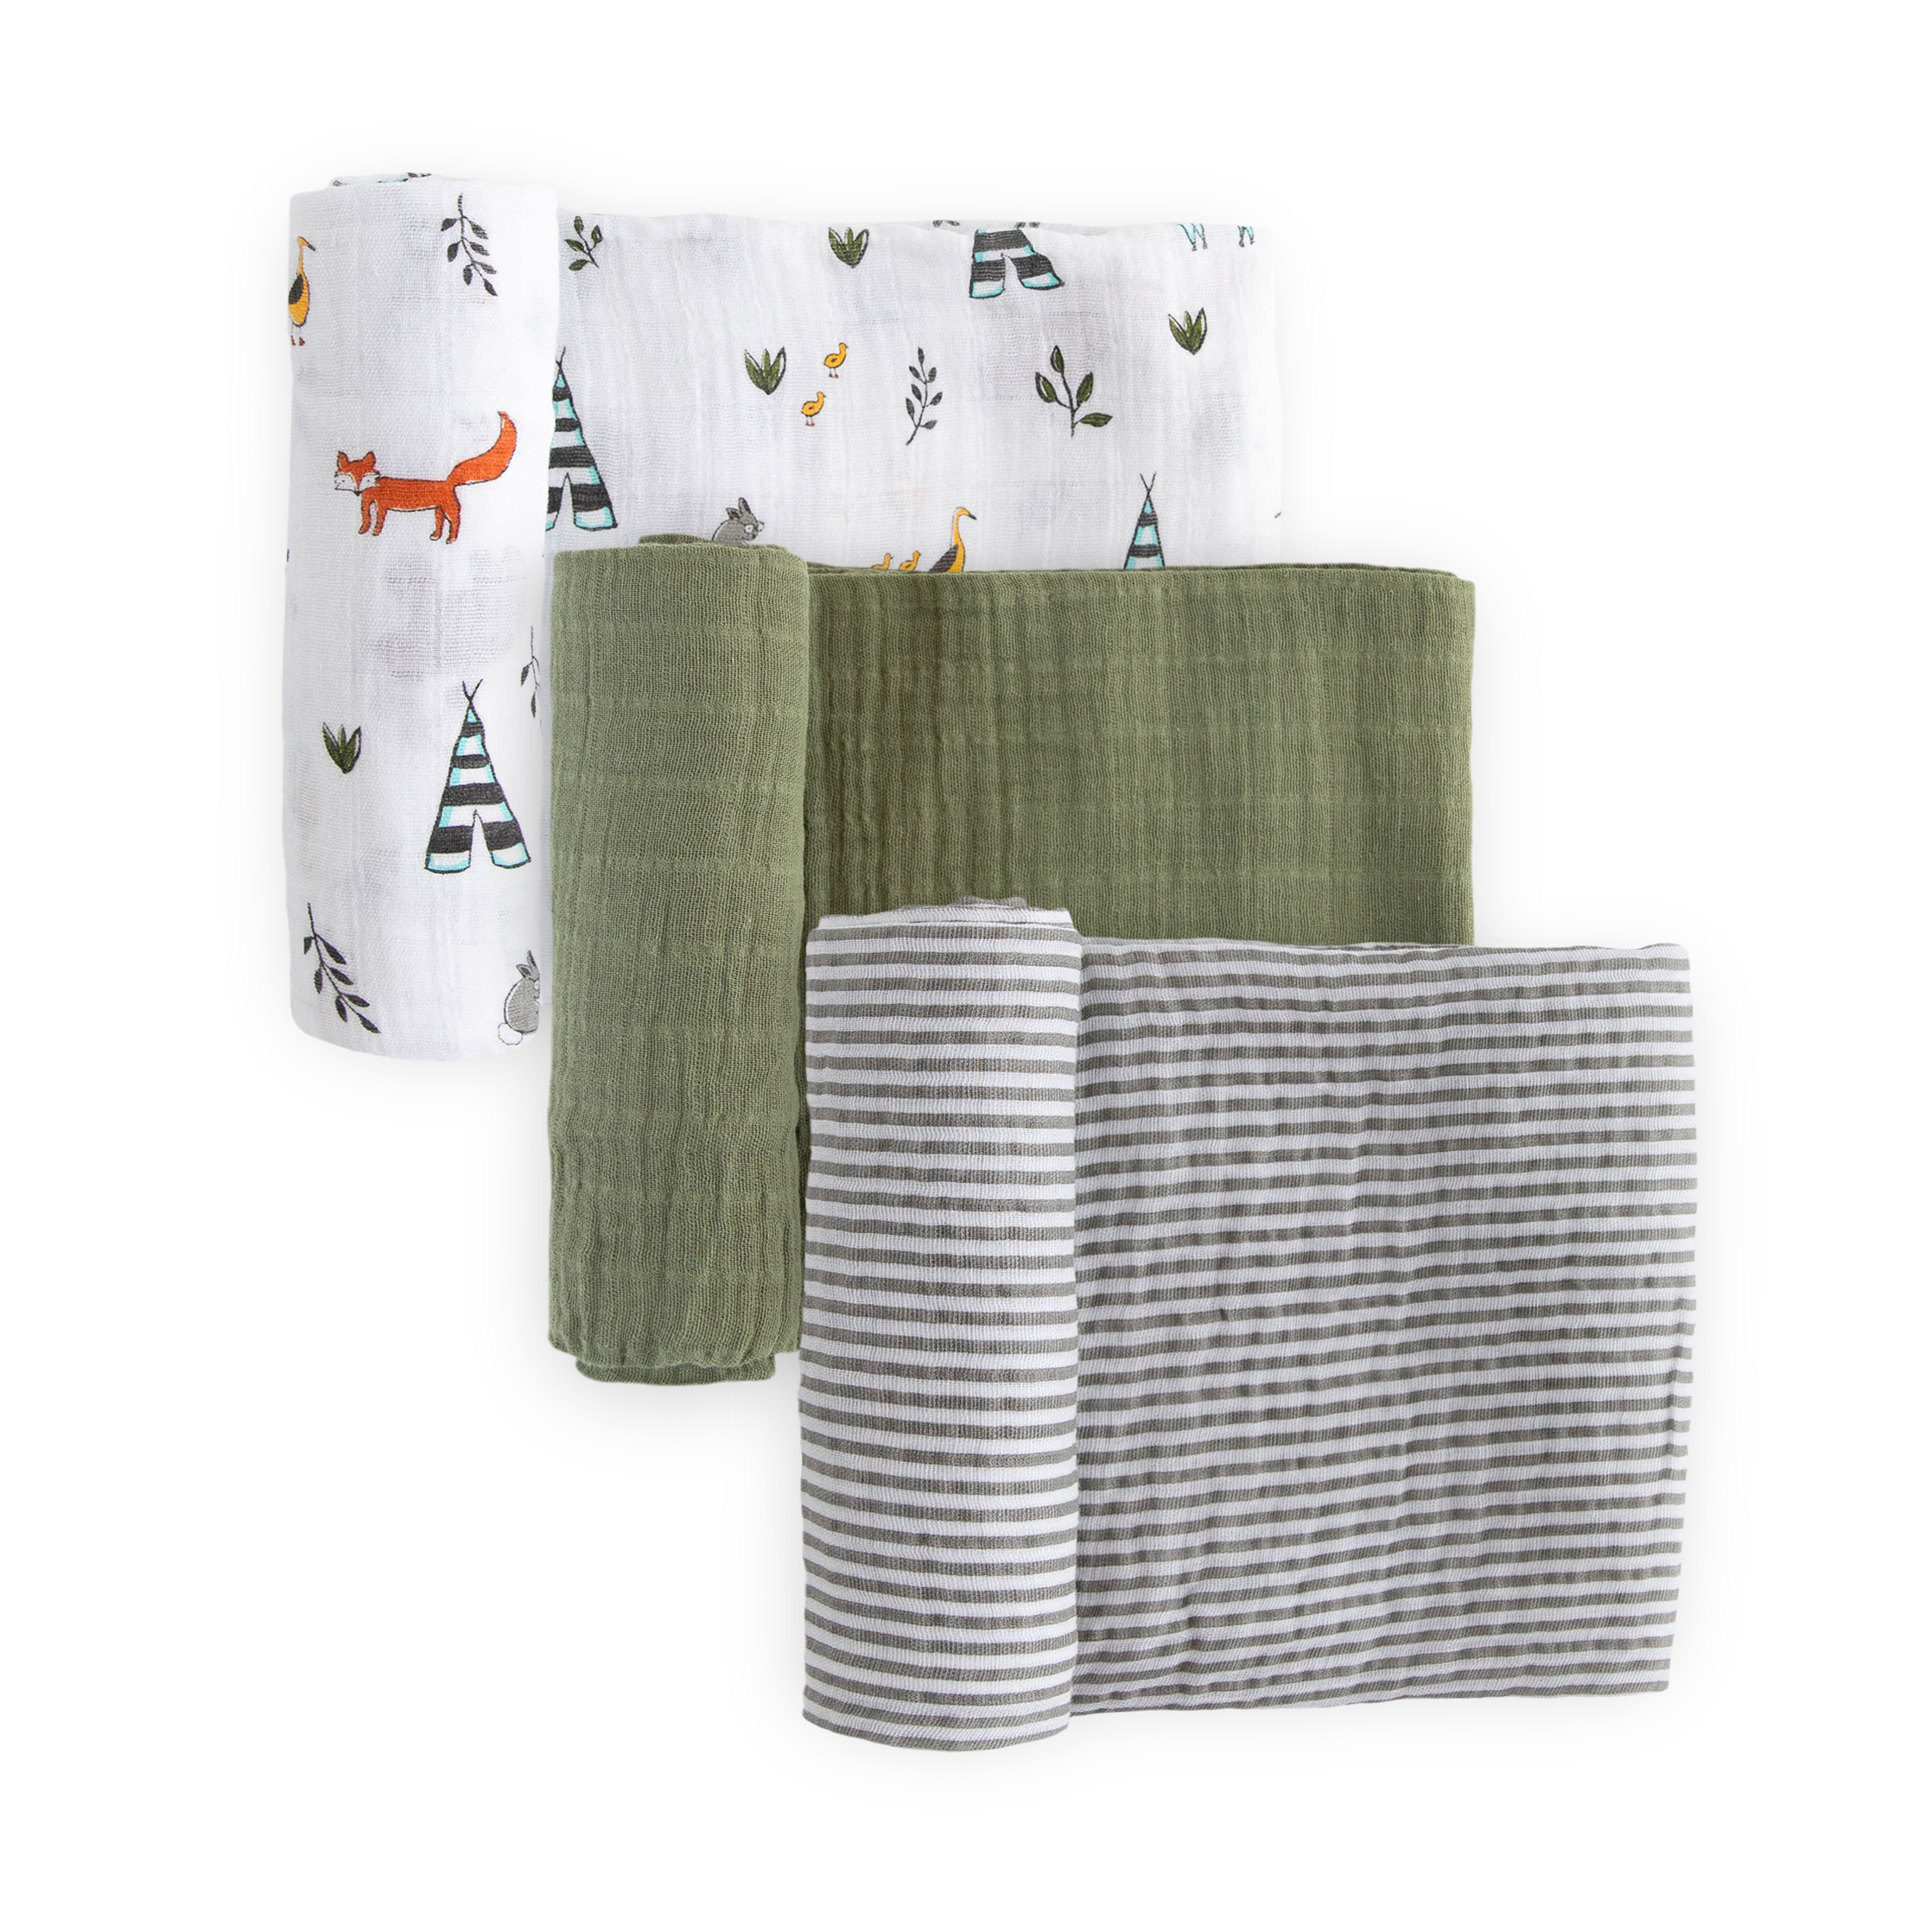 Cotton Muslin Swaddle Blanket 3 Pack - Forest Friends 2